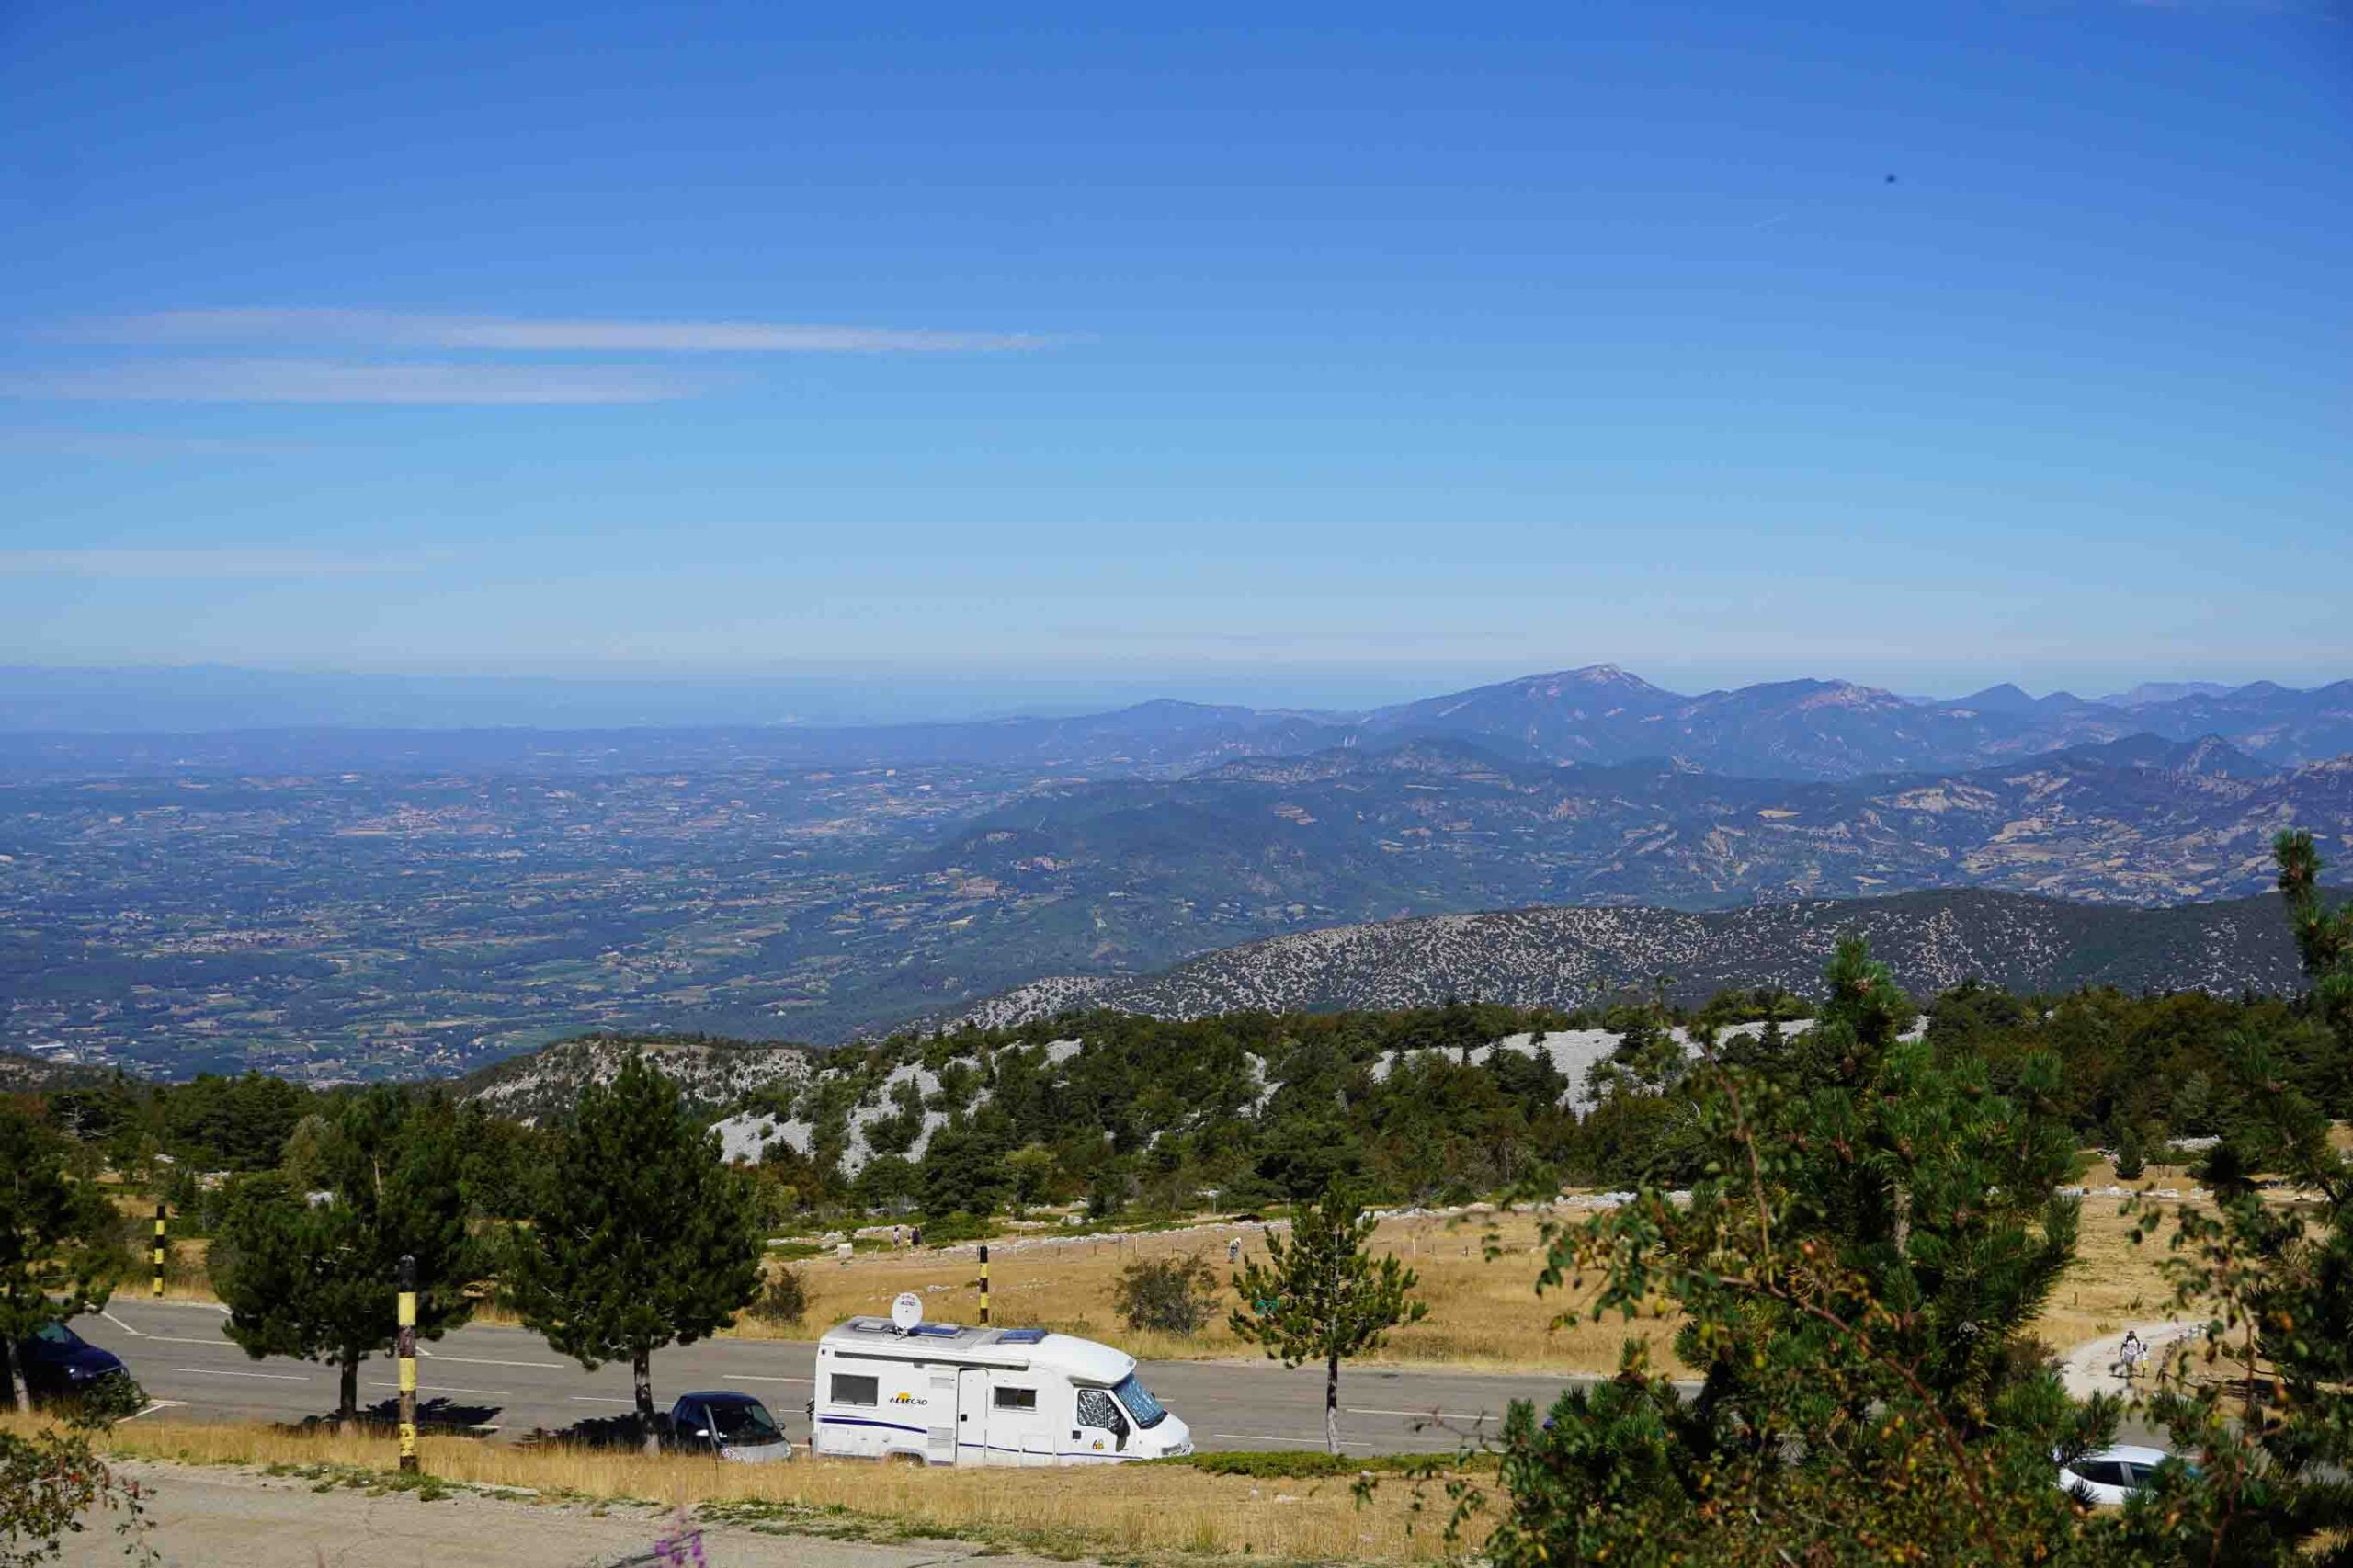 Far-reaching views across Provence from Ventoux